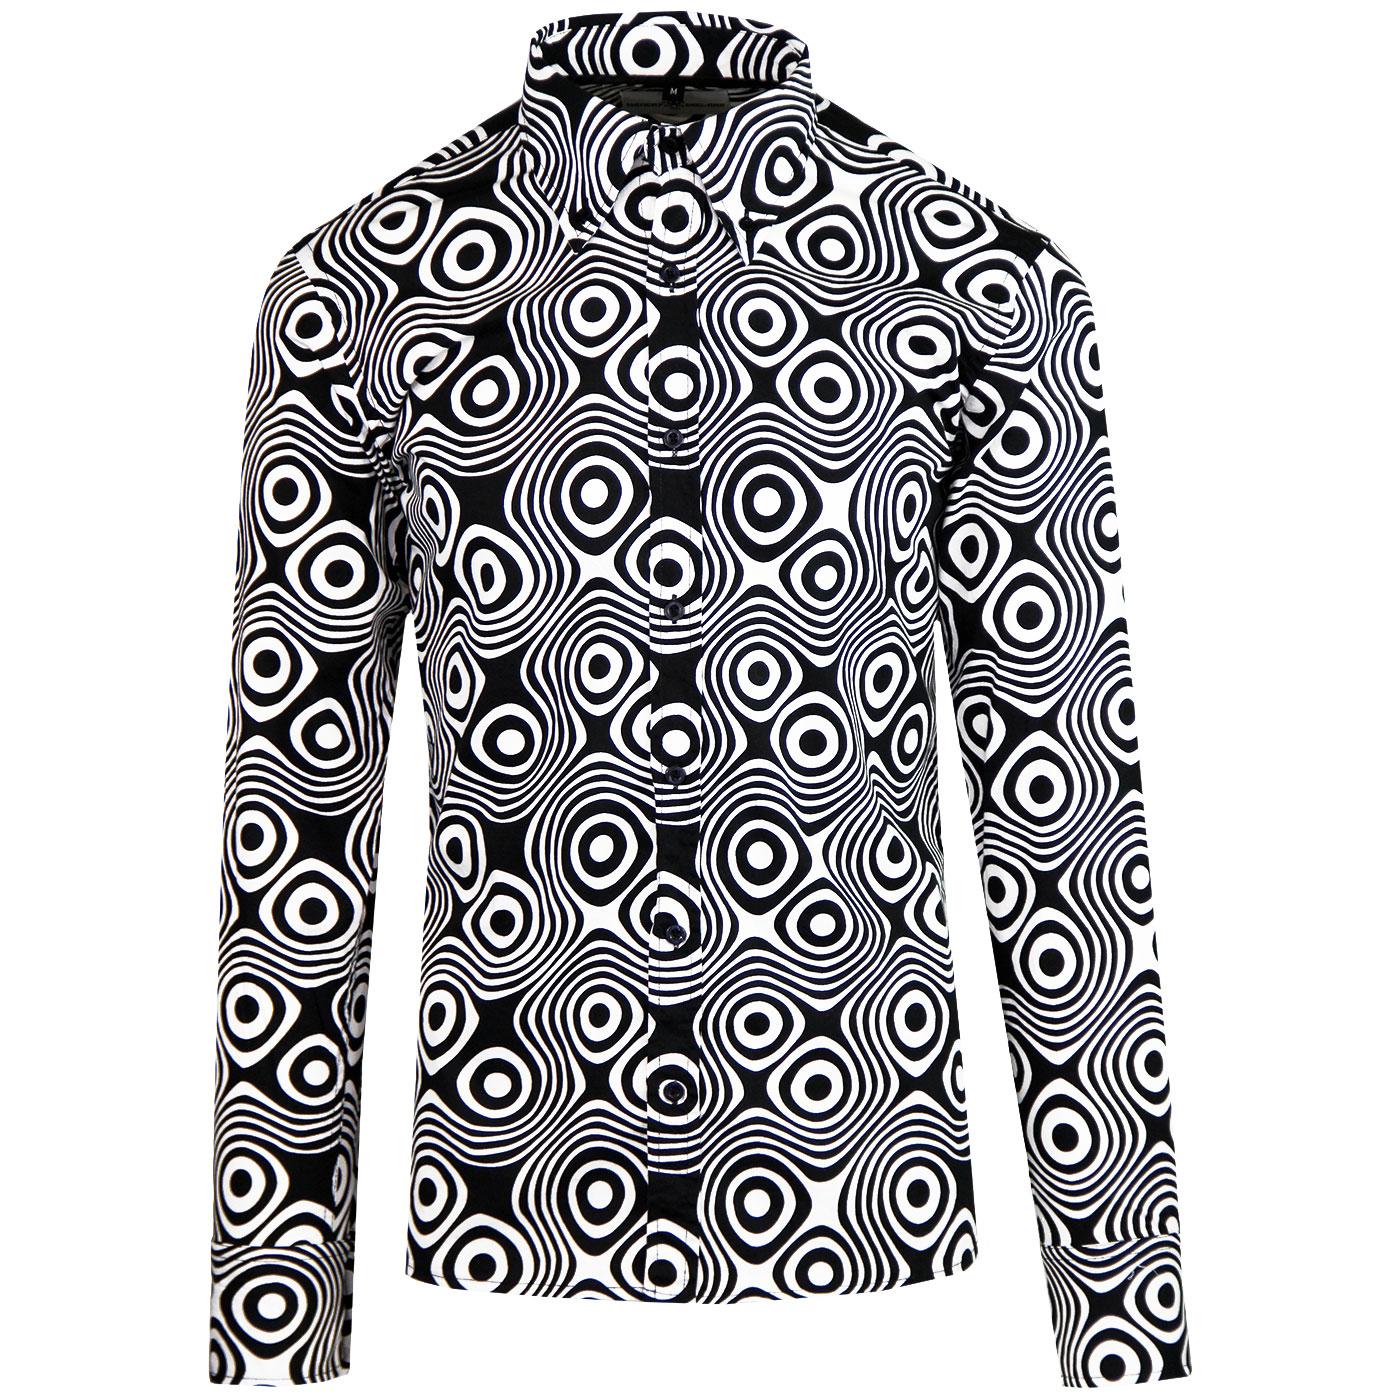 Madcap England Trip Op Art 1960s Psychedelic Mod Button Down Shirt in Black/White